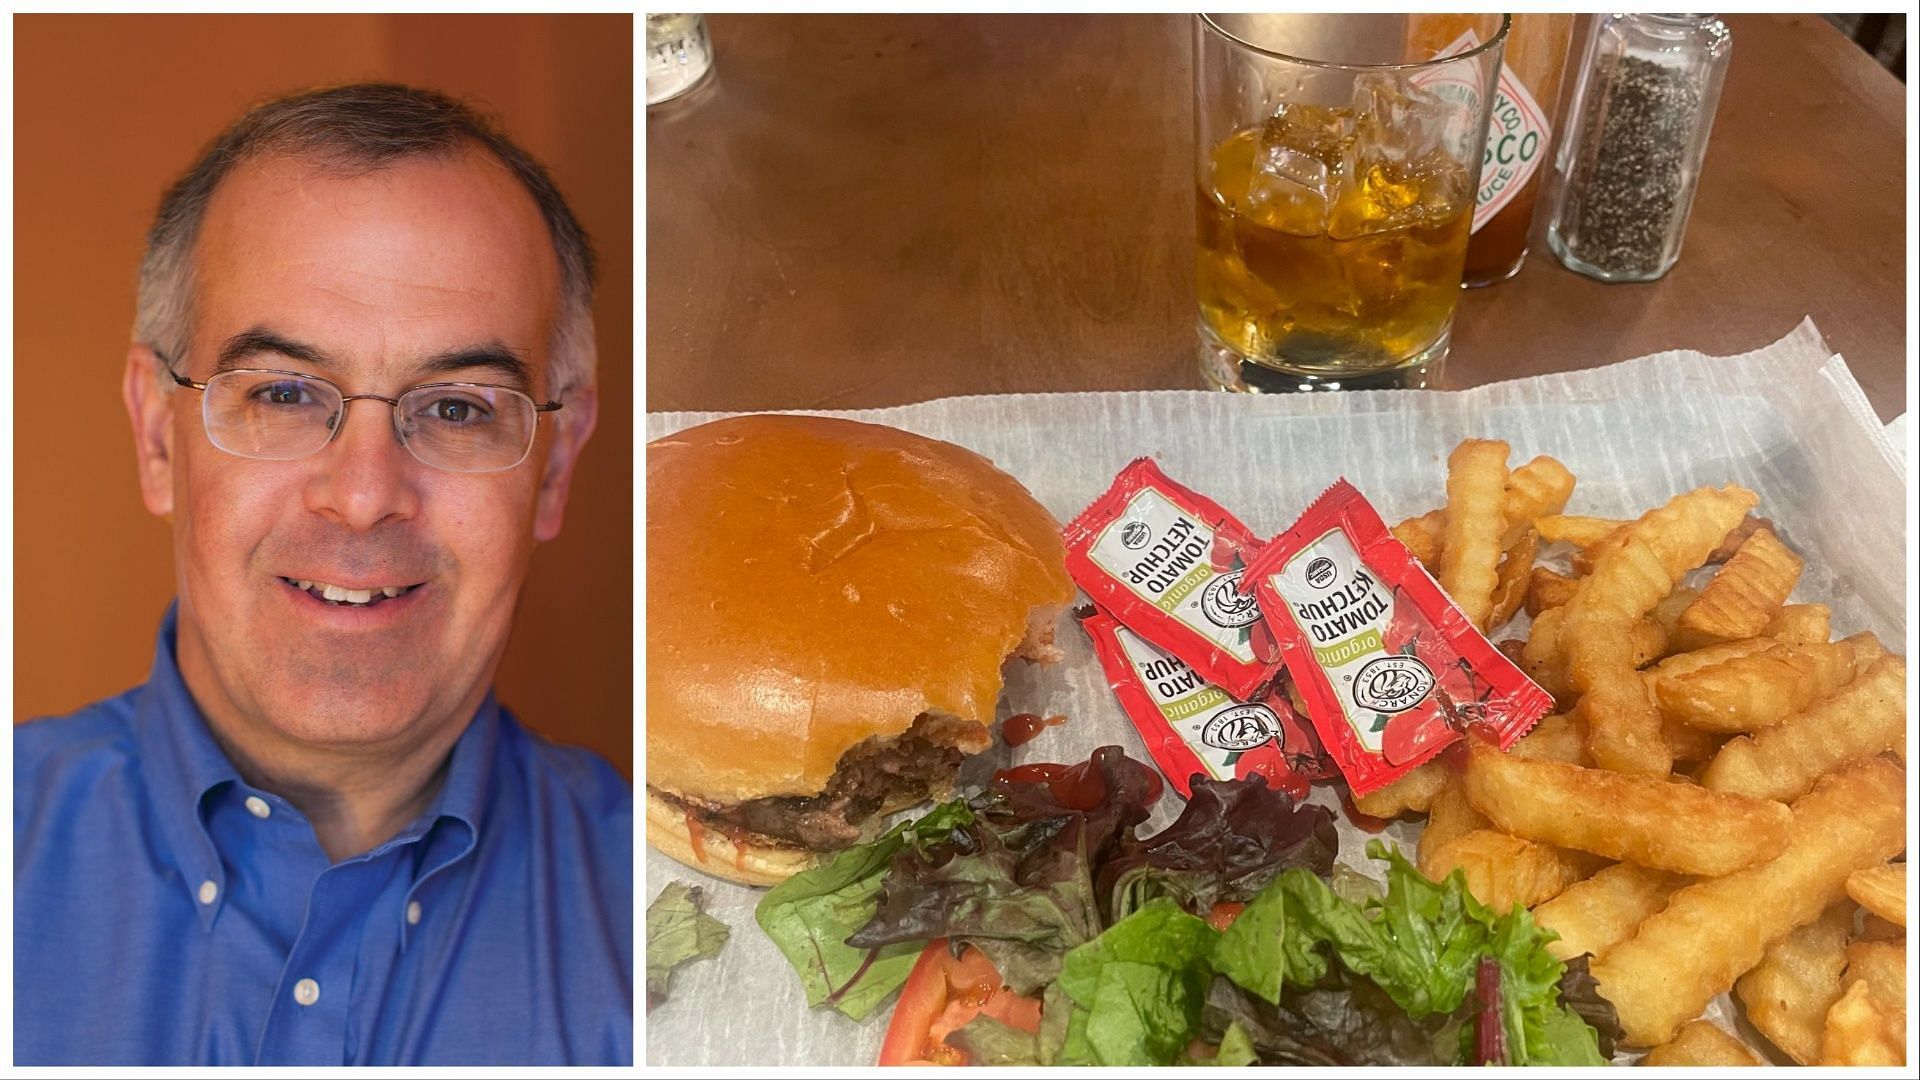 David Brooks was agitated at his $78 airport meal price but turns out 80% of meal price was alcohol (Image via Facebook/David Brooks, X/@nytdavidbrooks)